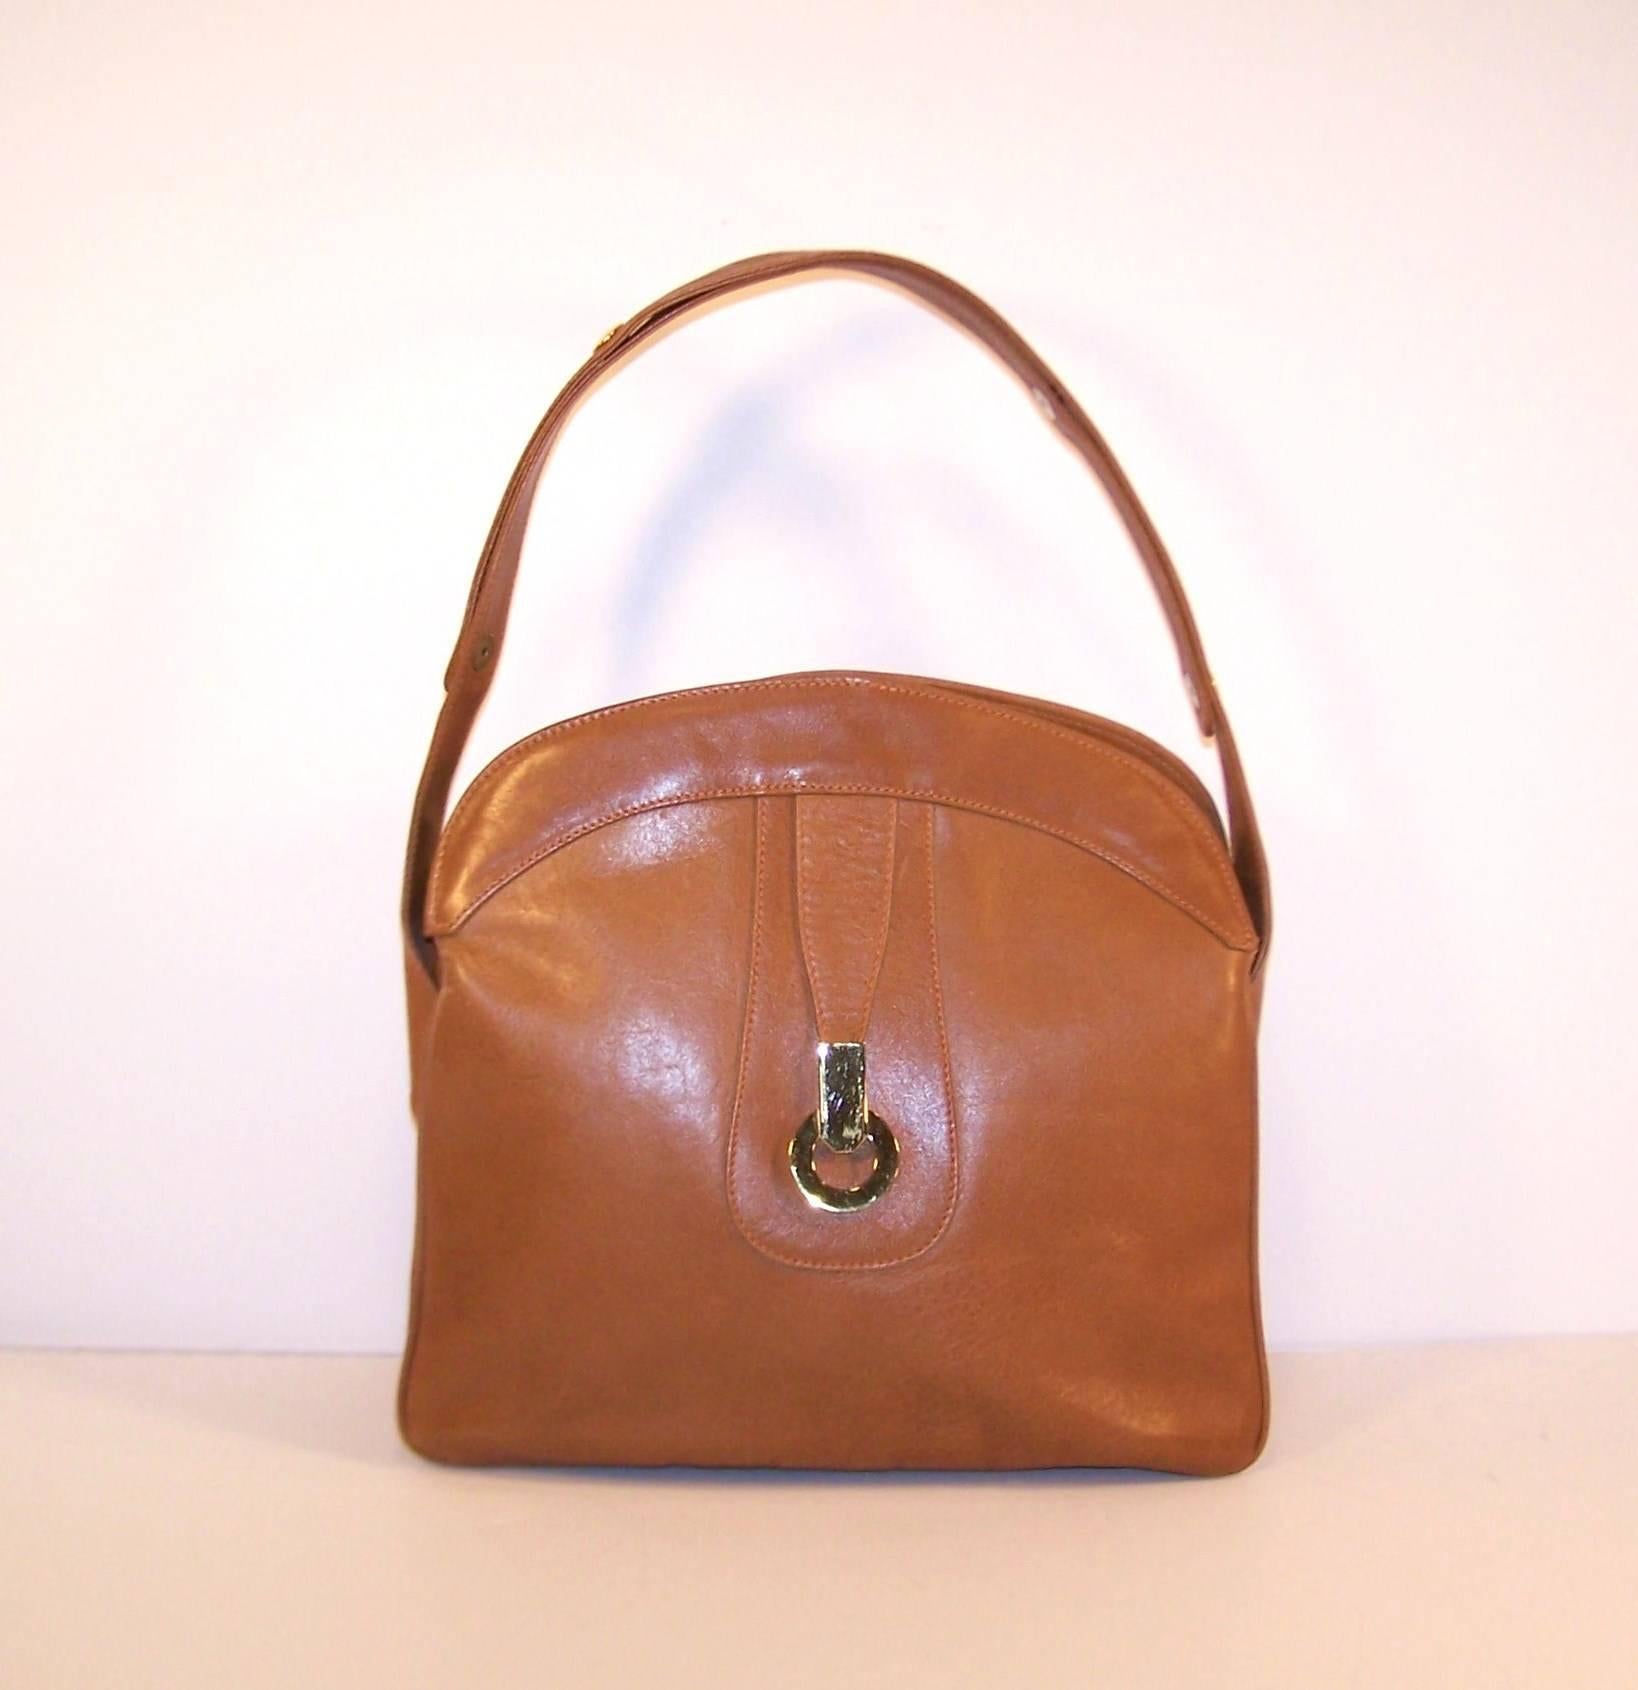 What a classic 1970's handbag with the quality of timeless style.  The versatile cognac color leather is accented with chunky gold tone hardware and an adjustable strap allowing for a quick change from top handle to shoulder strap.  The accordion